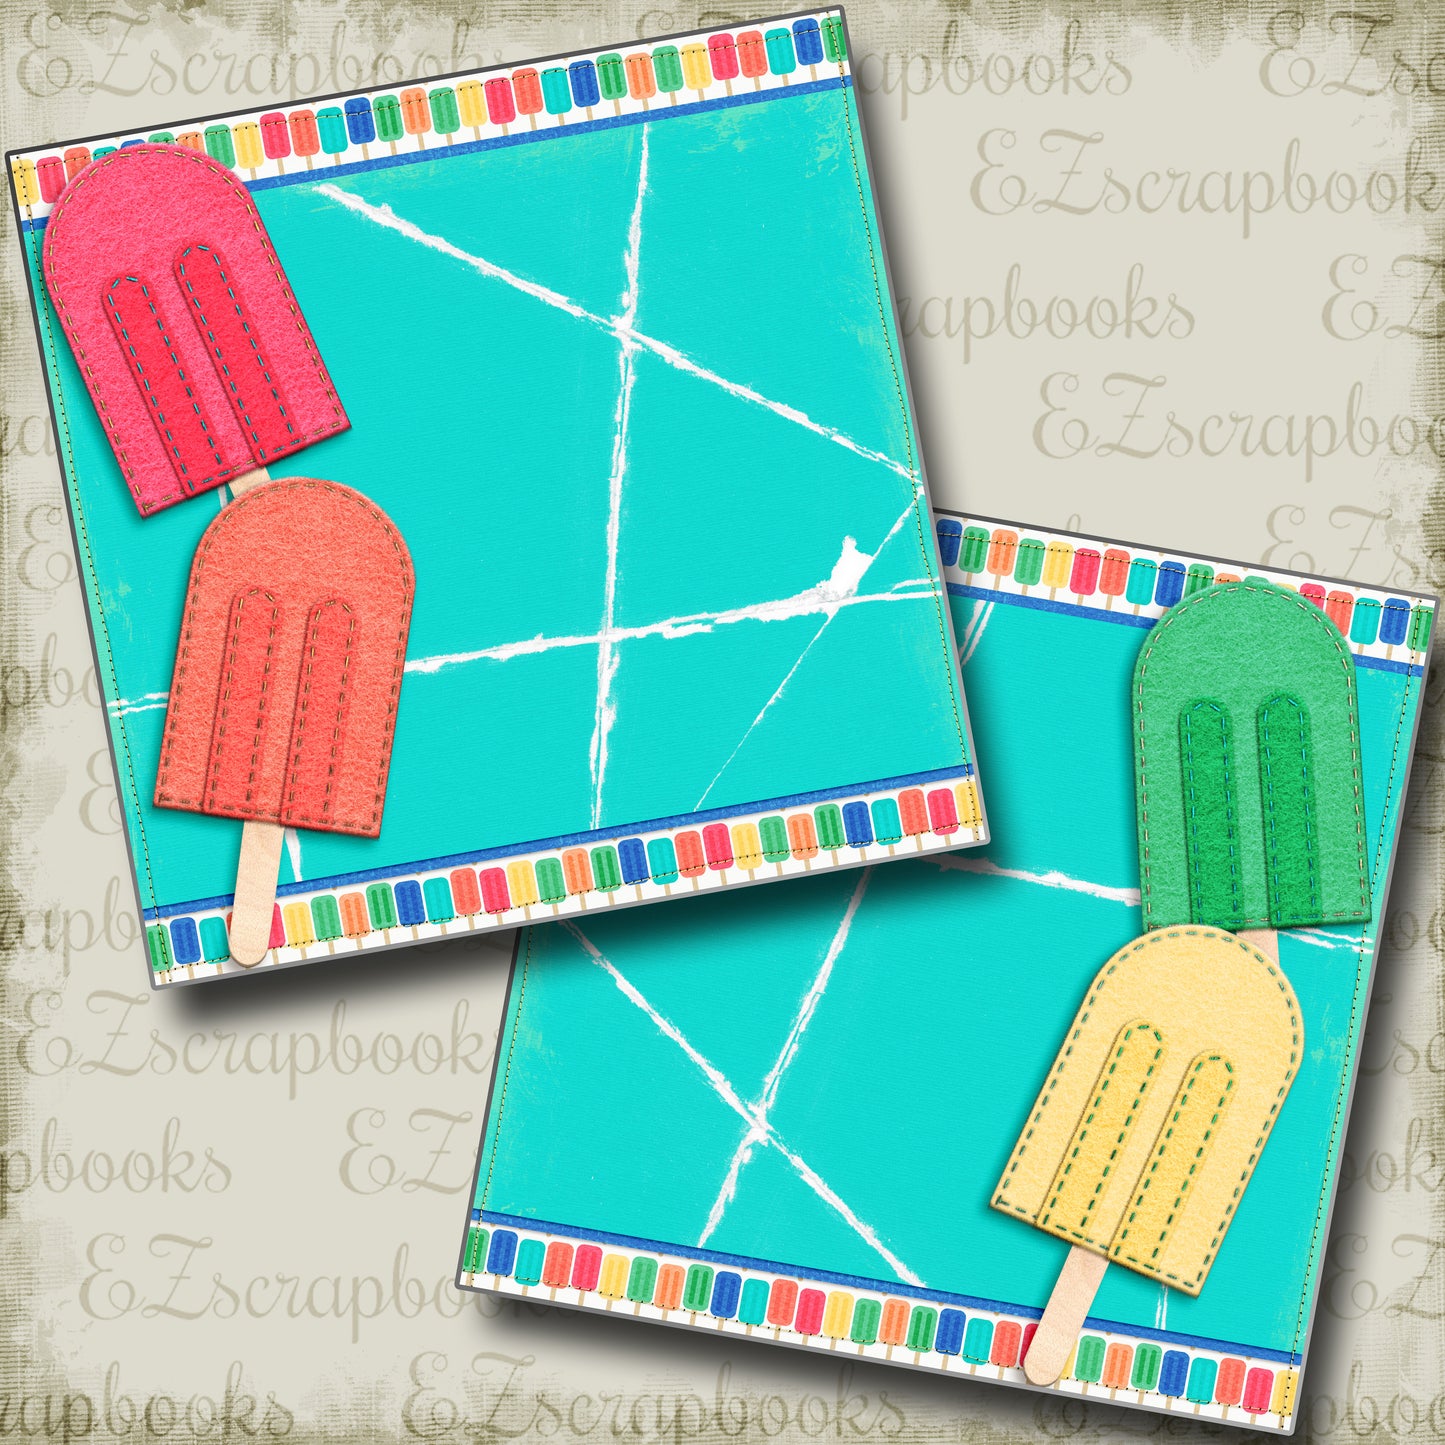 Chill Out NPM - 4061 - EZscrapbooks Scrapbook Layouts Beach - Tropical, Summer, Swimming - Pool